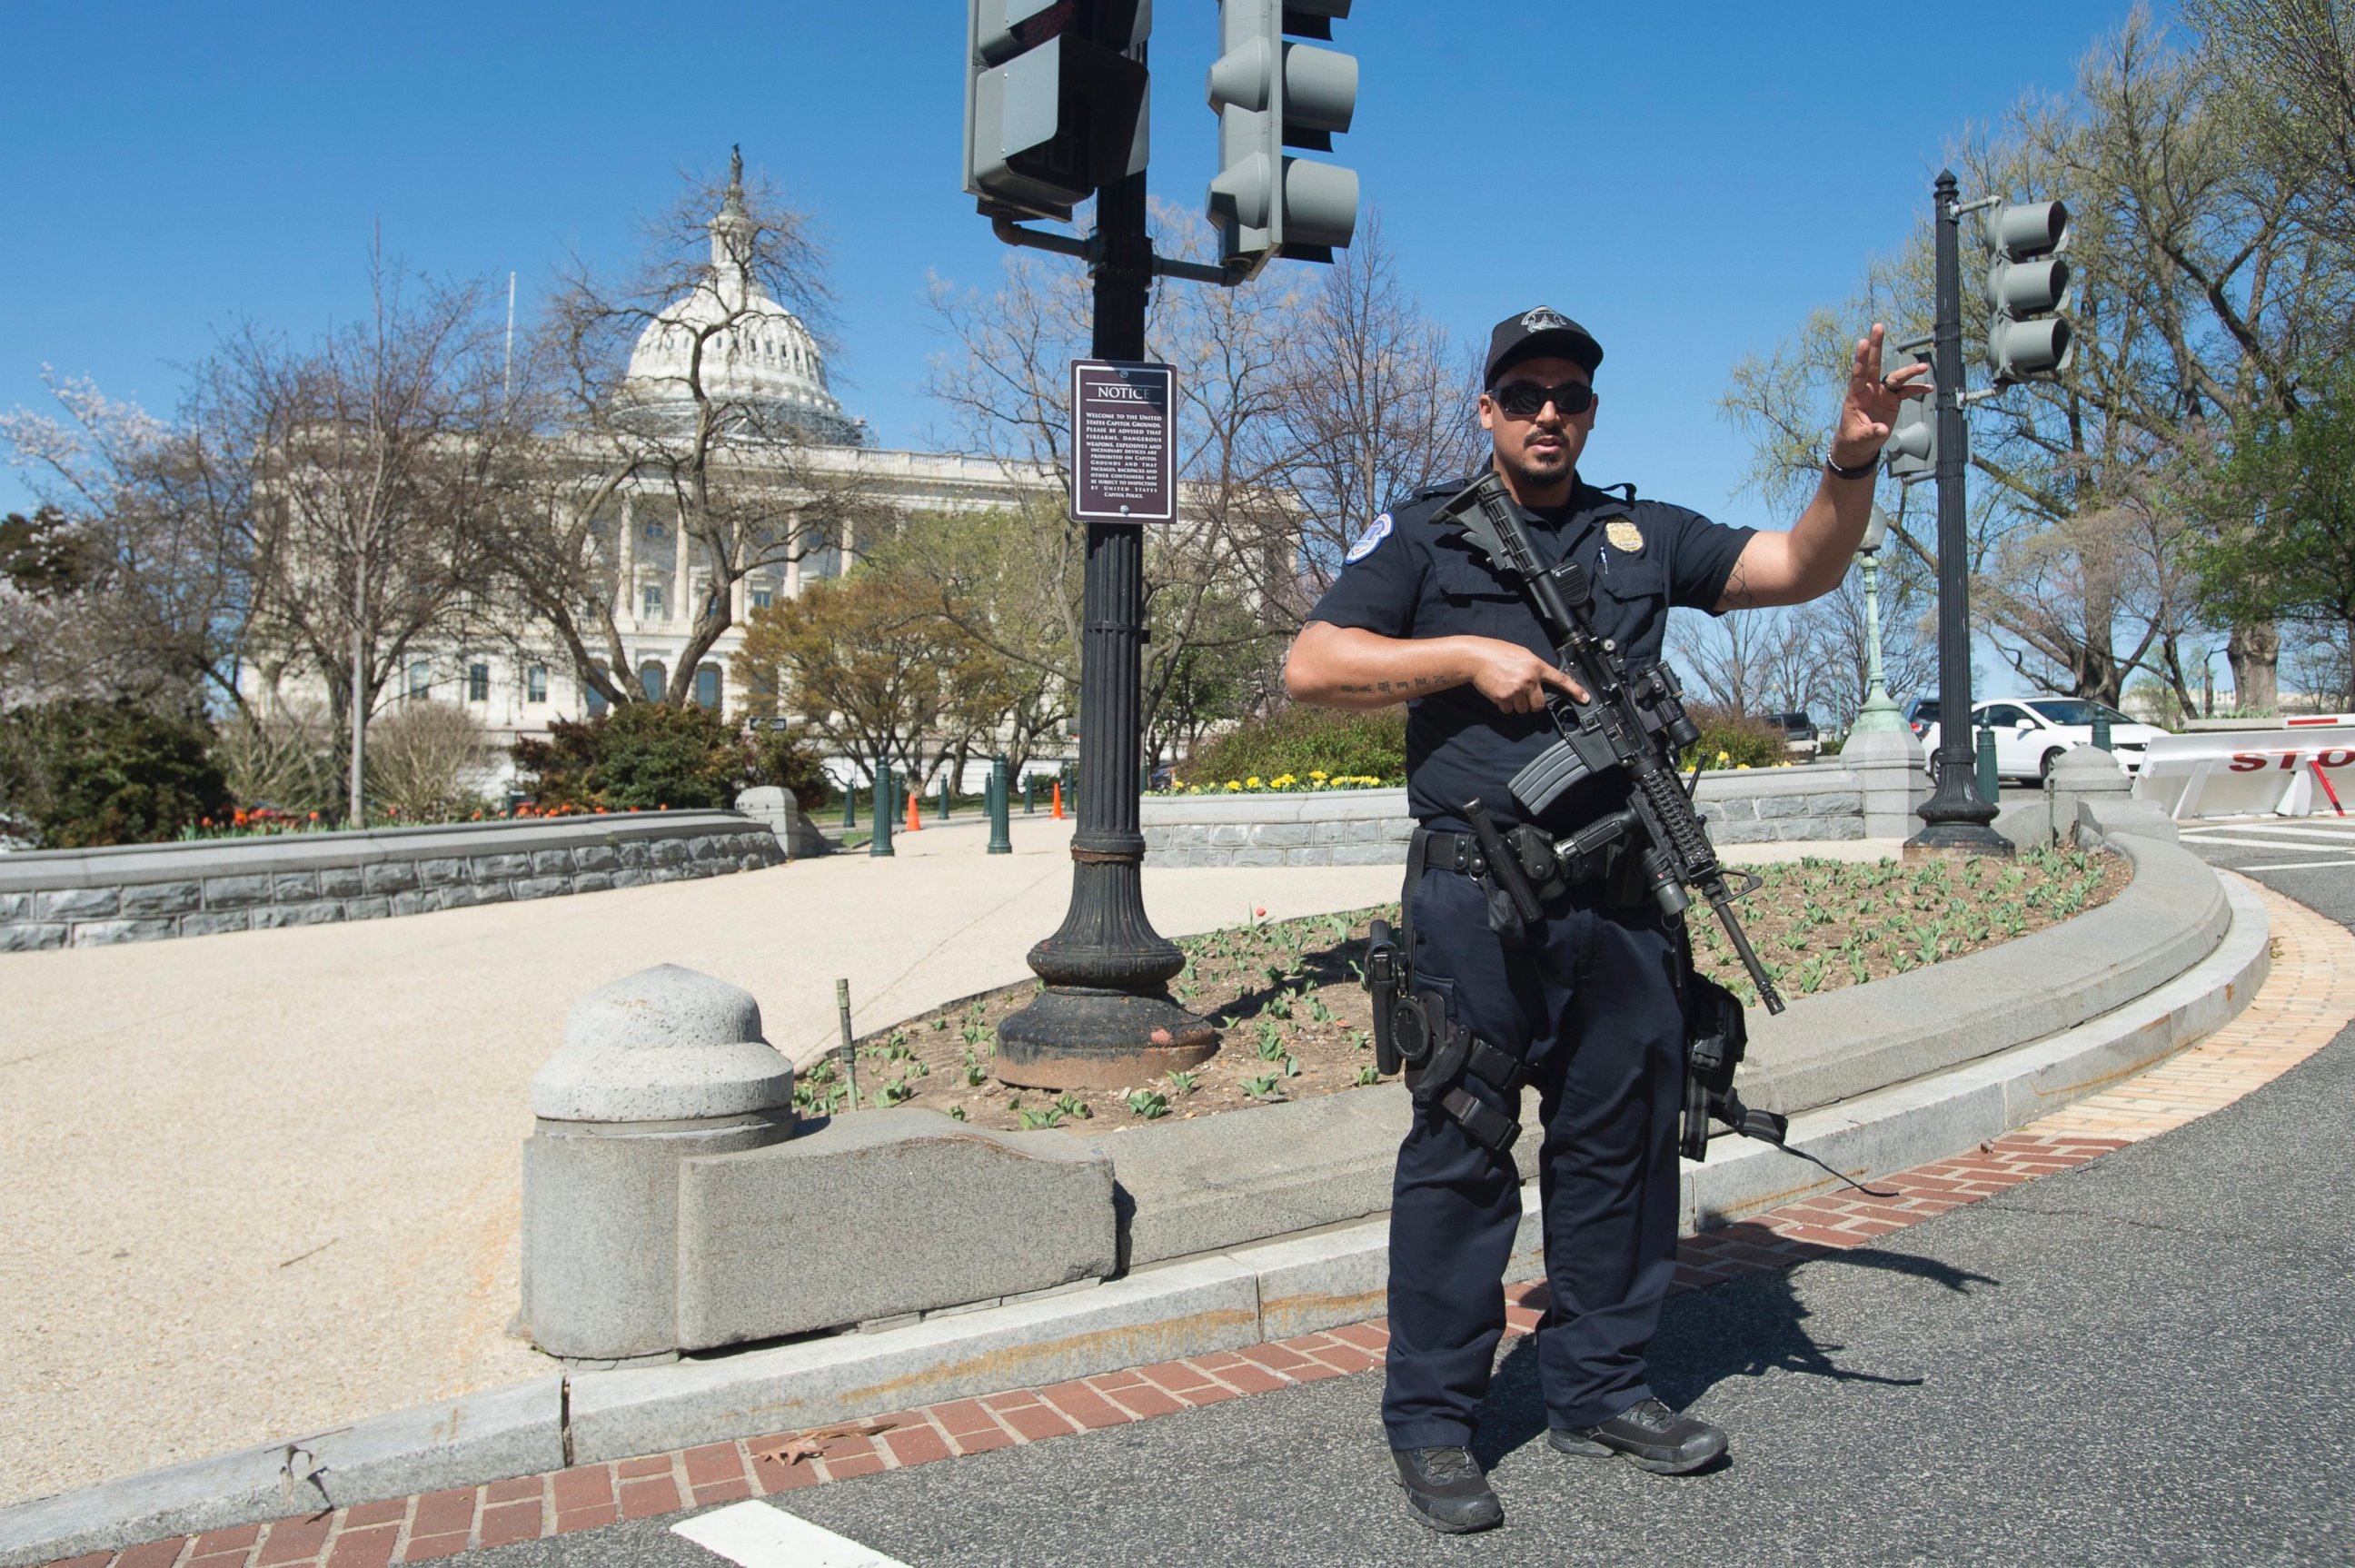 PHOTO: Capitol Police direct pedestrians away in response to a report of shots fired around the U.S. Capitol in Washington D.C., March 28, 2016.